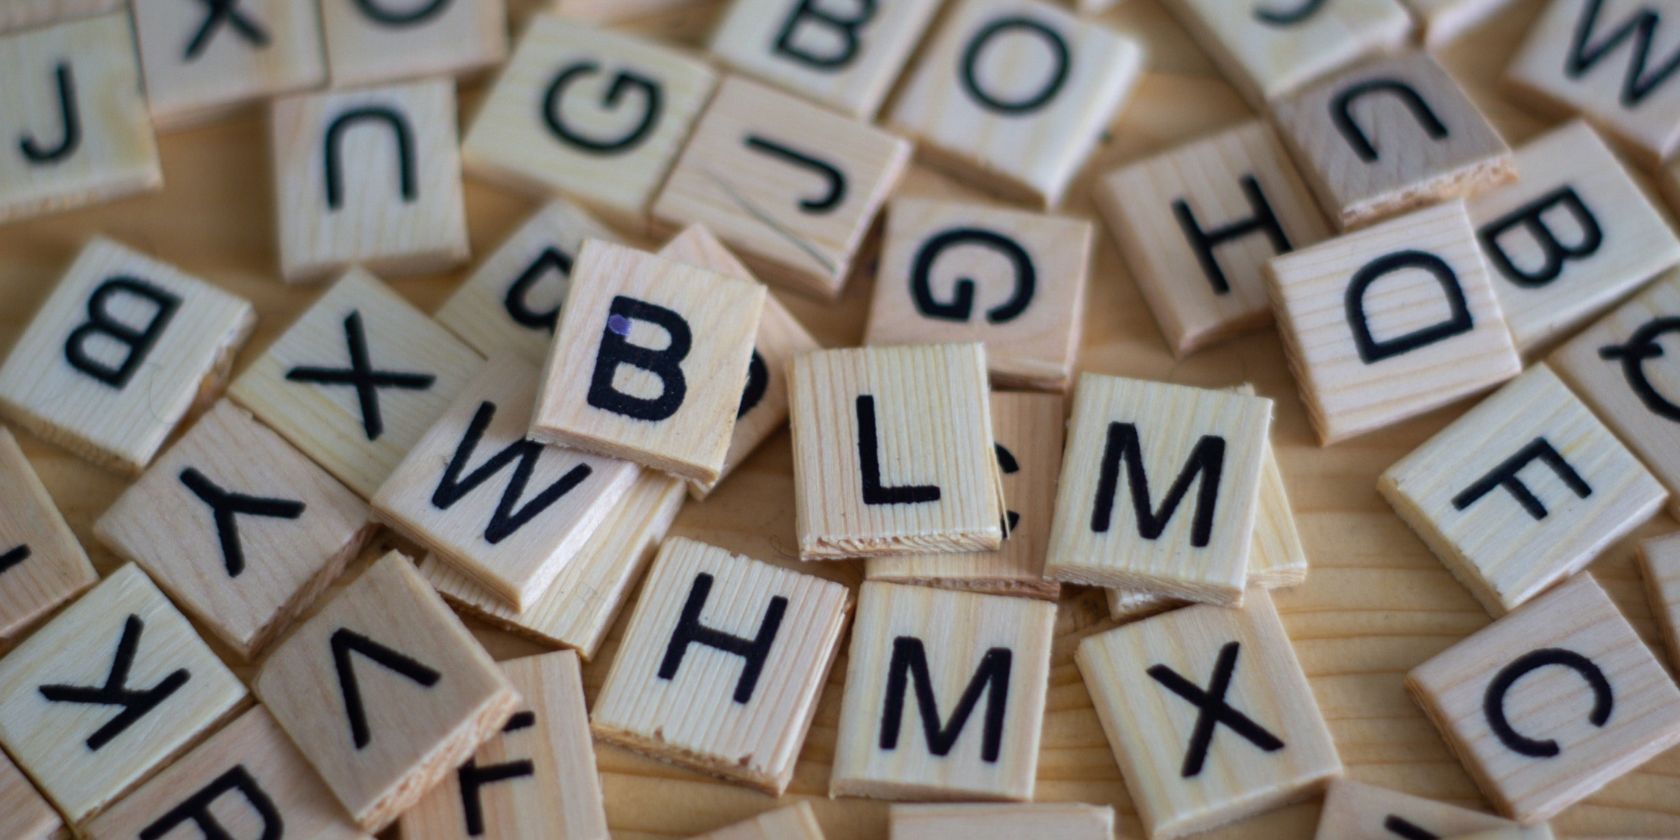 Word tiles spread on a wooden surface